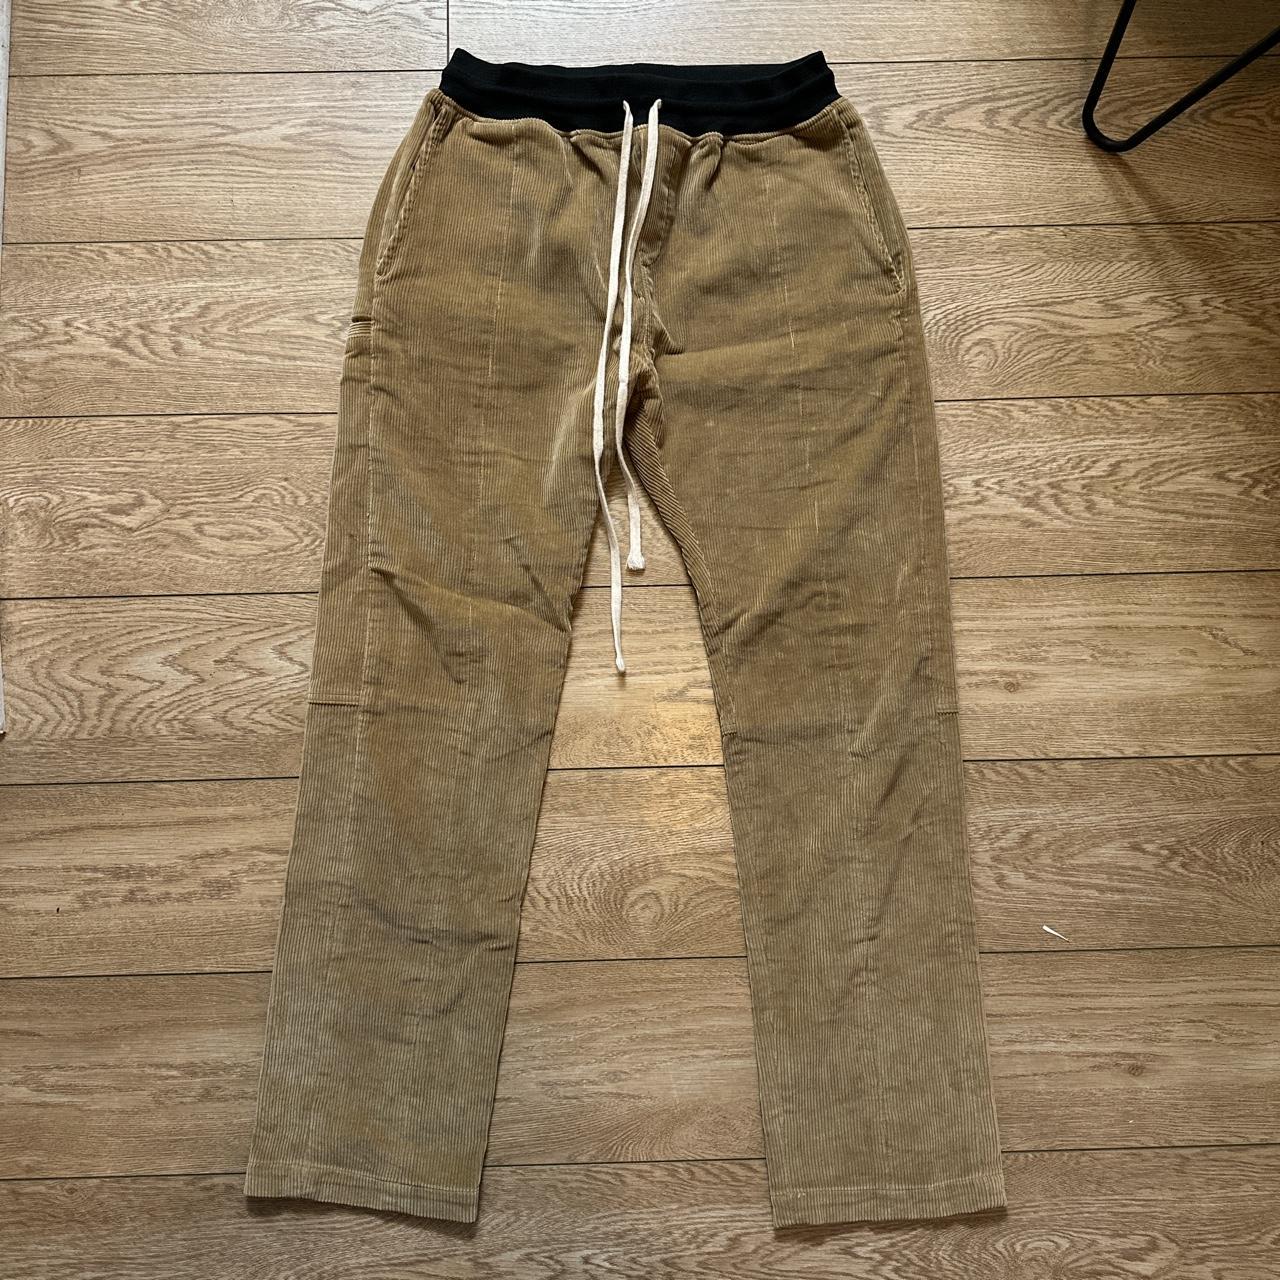 Corduroy pants fear of god 5th collection Condition... - Depop